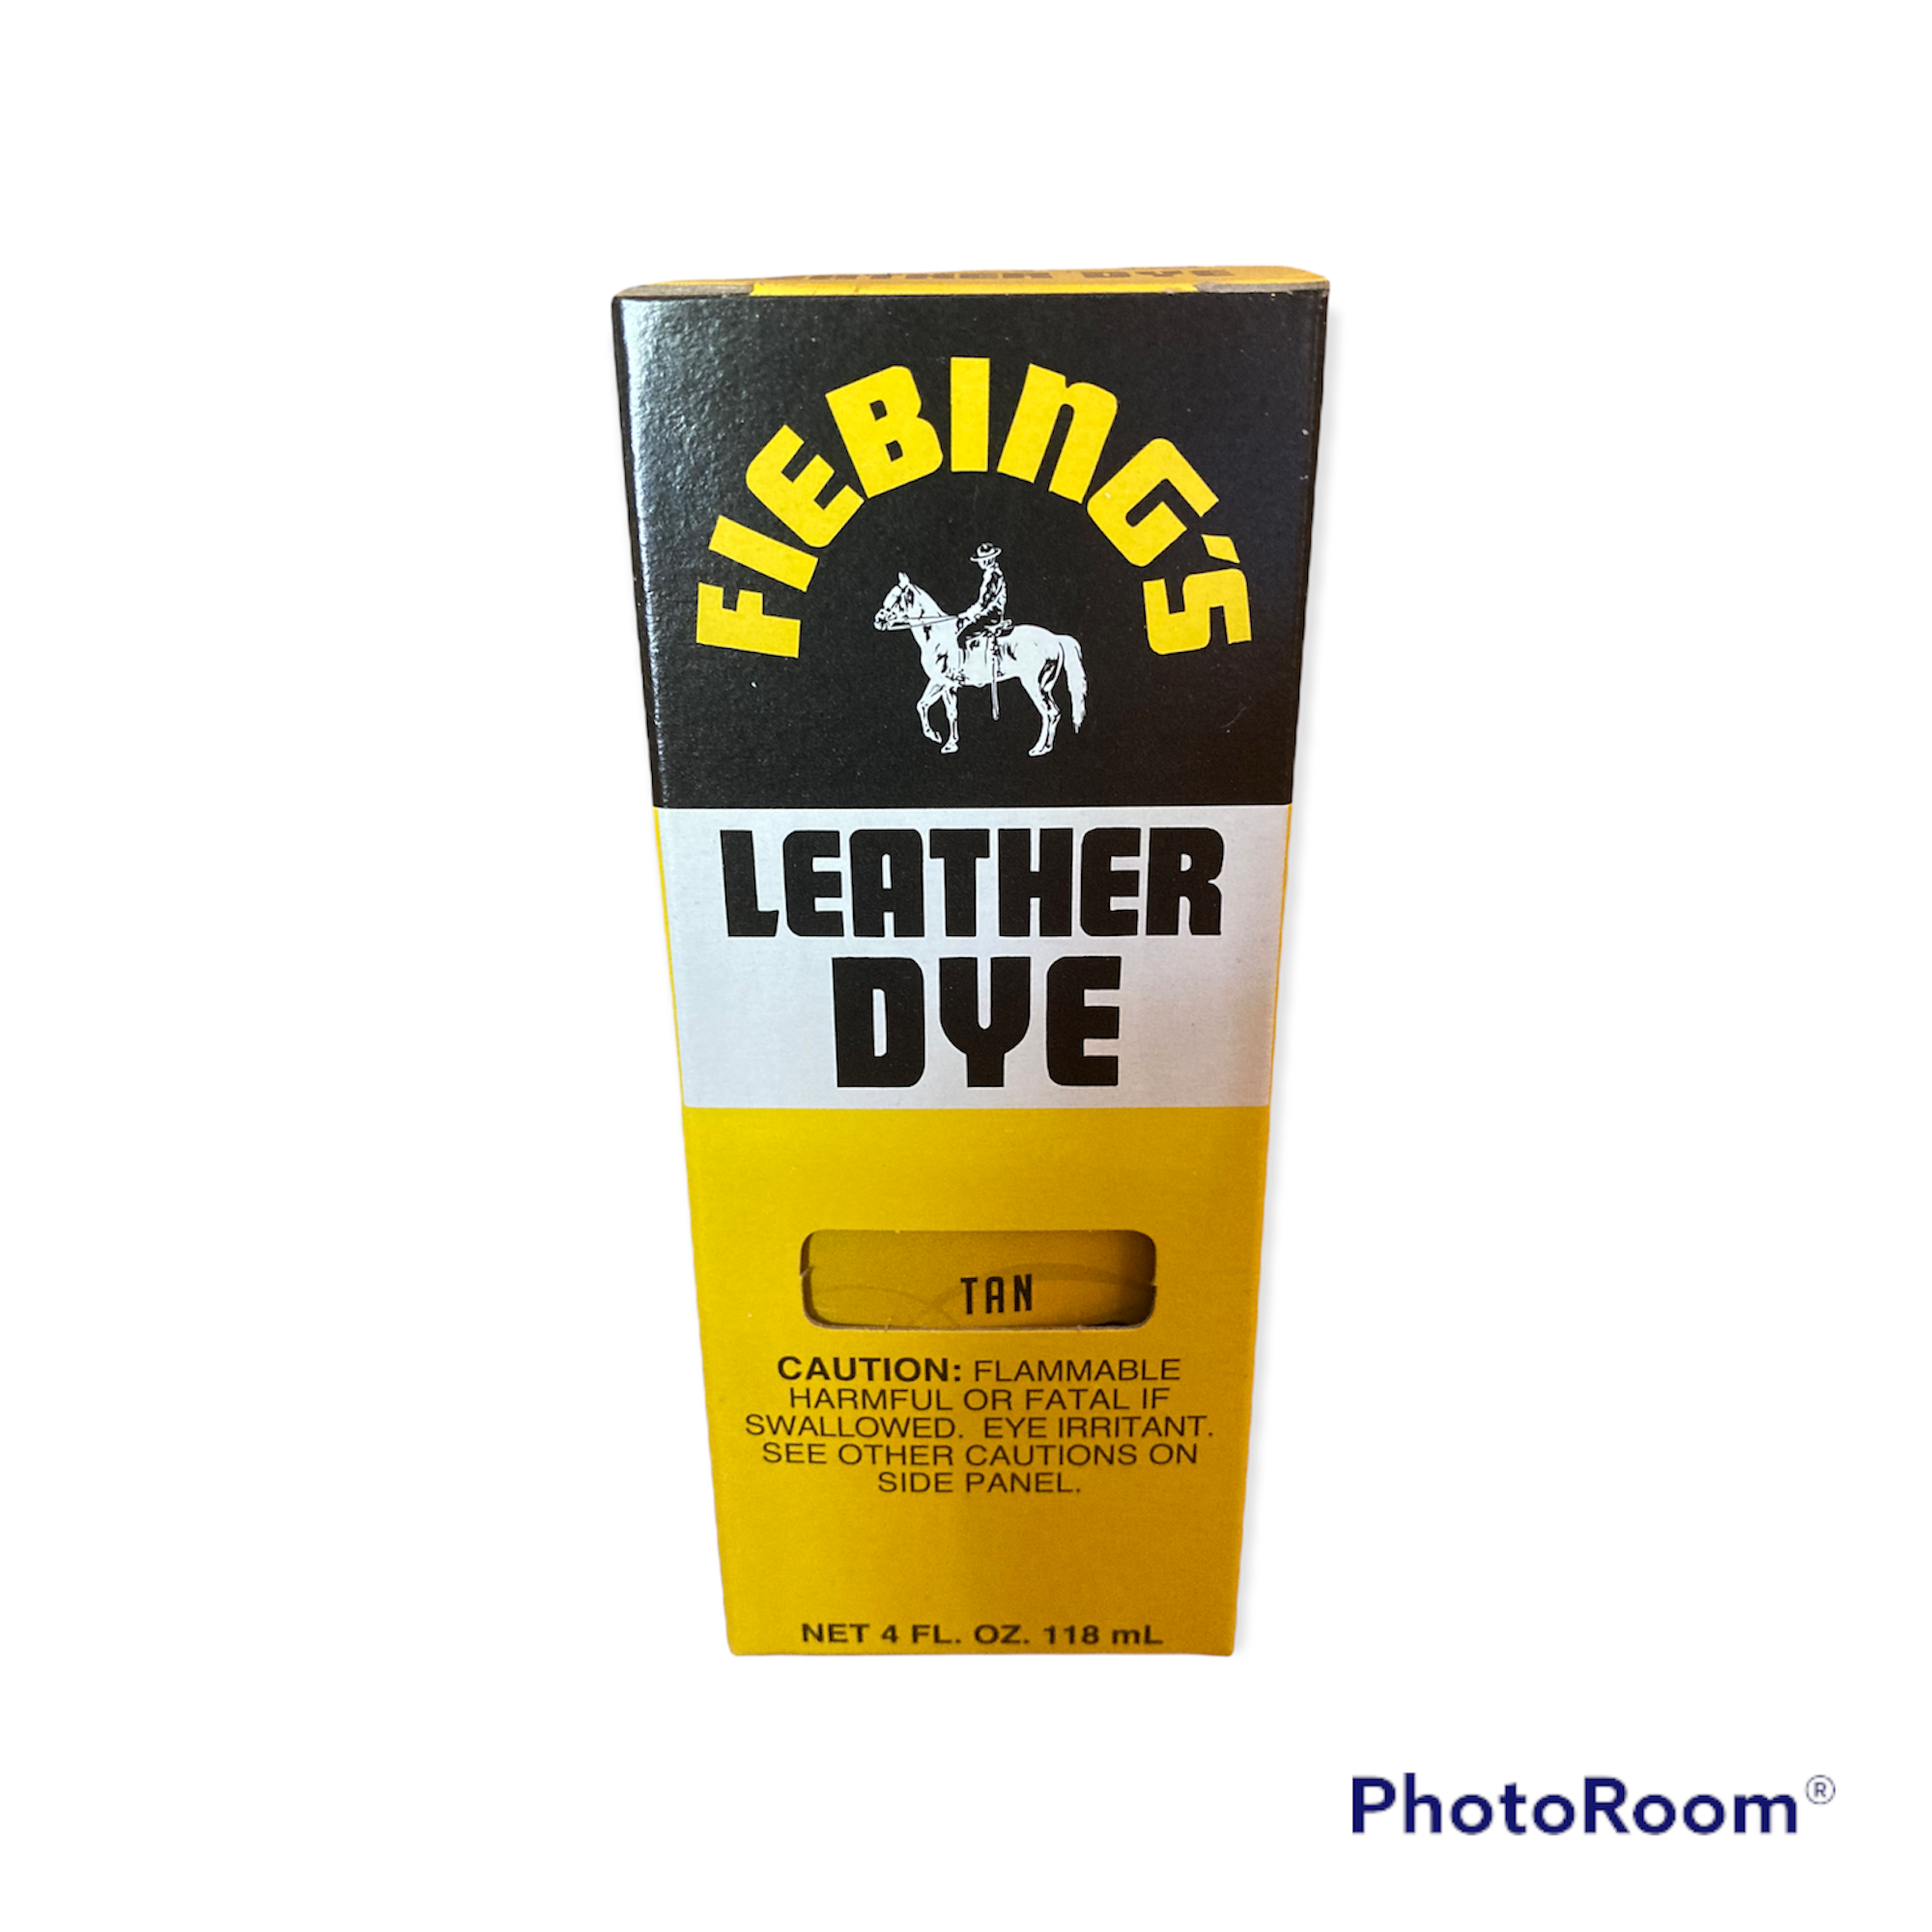  Fiebing's Leather Dye - Alcohol Based Permanent Leather Dye - 4  oz - Beige : Arts, Crafts & Sewing